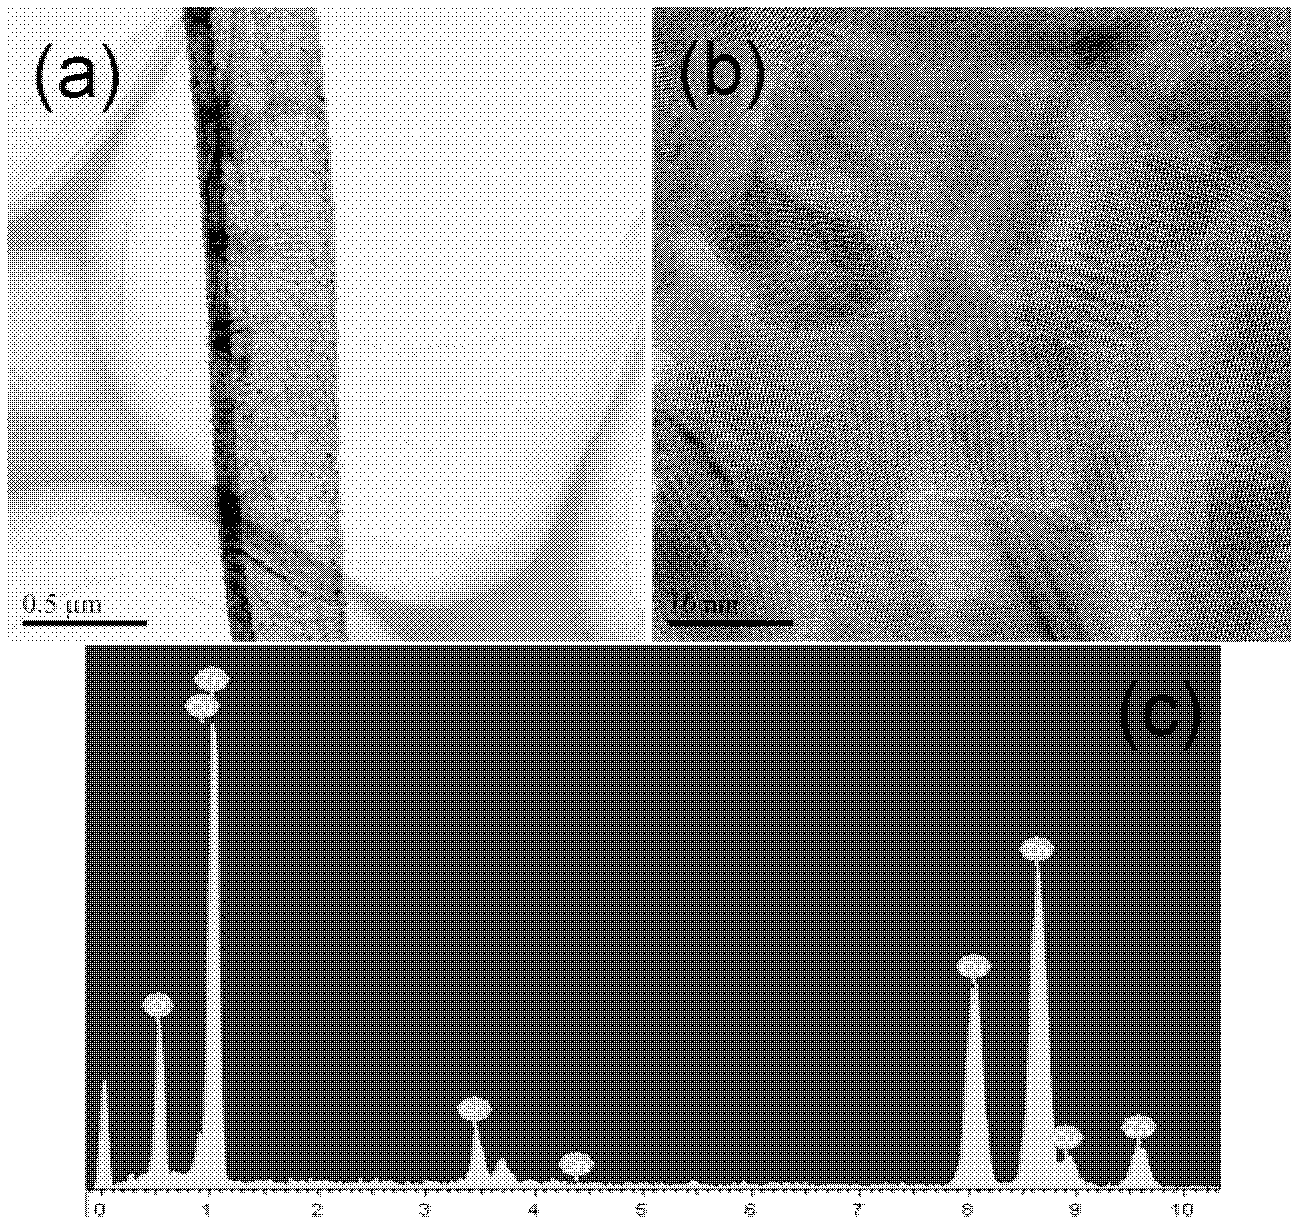 Method for preparing one-dimensional ZnO/SnO2 core/shell structure nano heterojunction semiconductor material